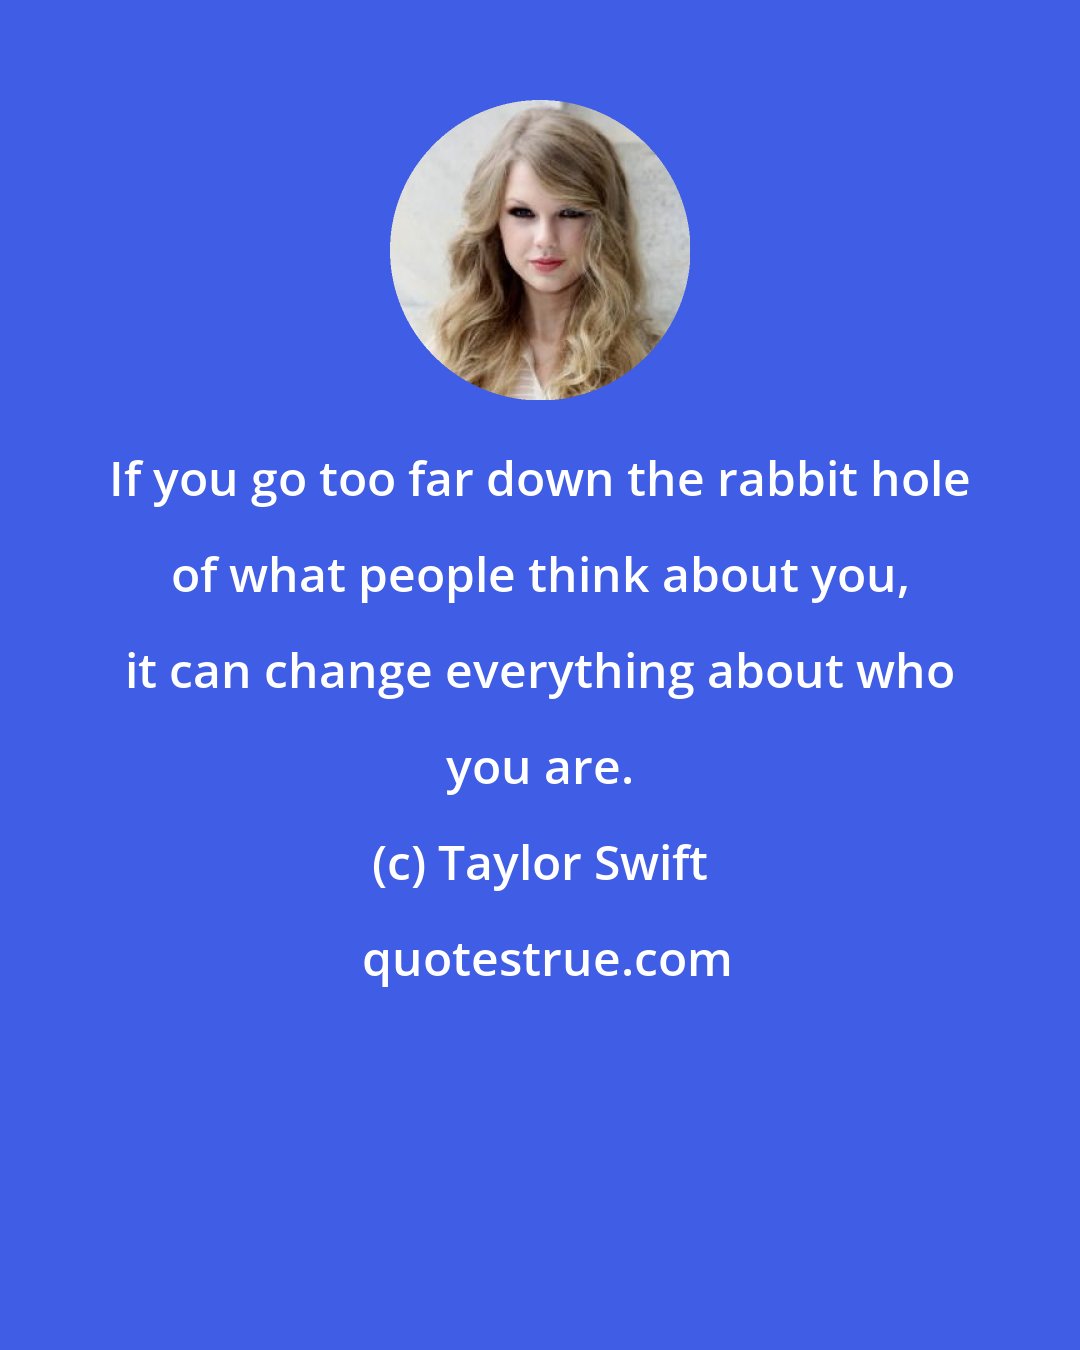 Taylor Swift: If you go too far down the rabbit hole of what people think about you, it can change everything about who you are.